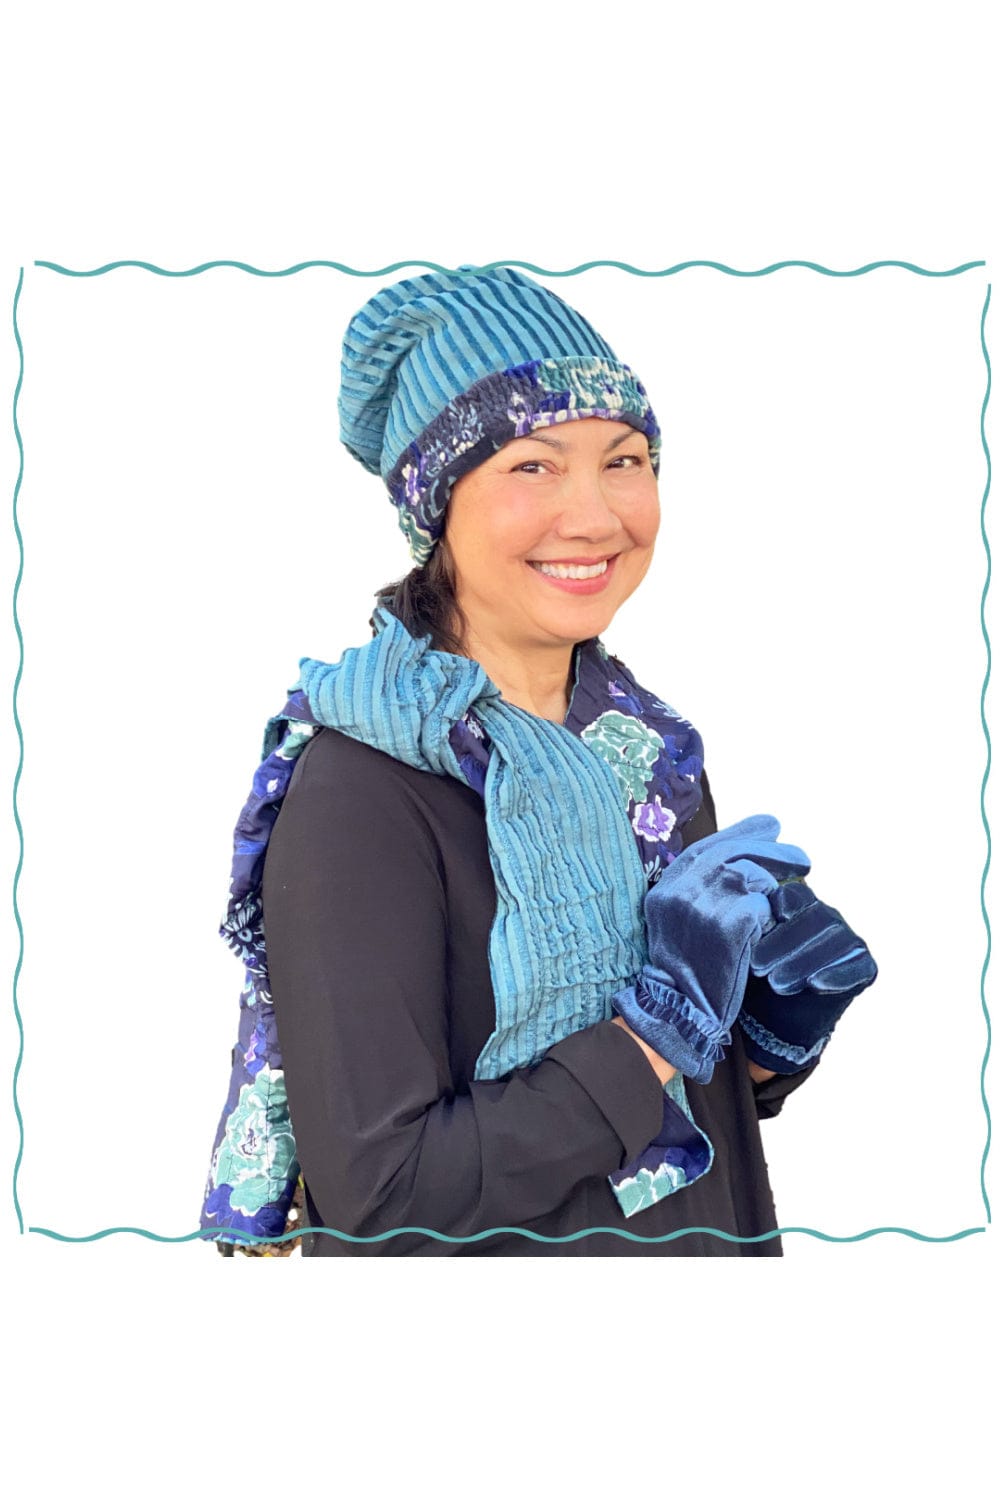 Reversible hat and scarve in a pretty blue floral and stripe design. Smilling model wearing blue velvet gloves and a black long sleeve tee.